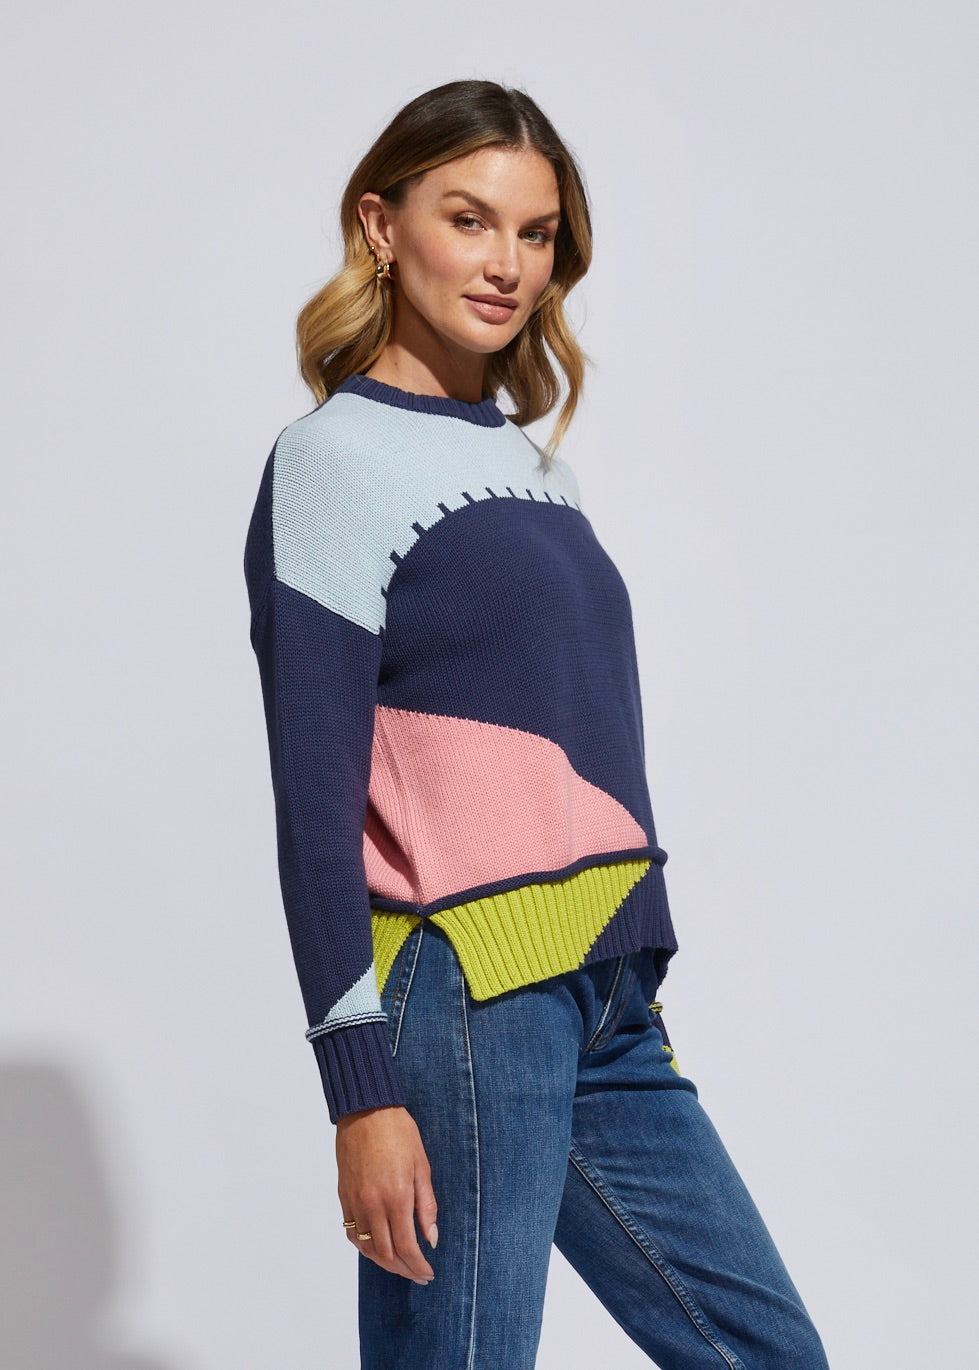 Intarsia Trim Jumper by ldandco is a knitted patterned jumper